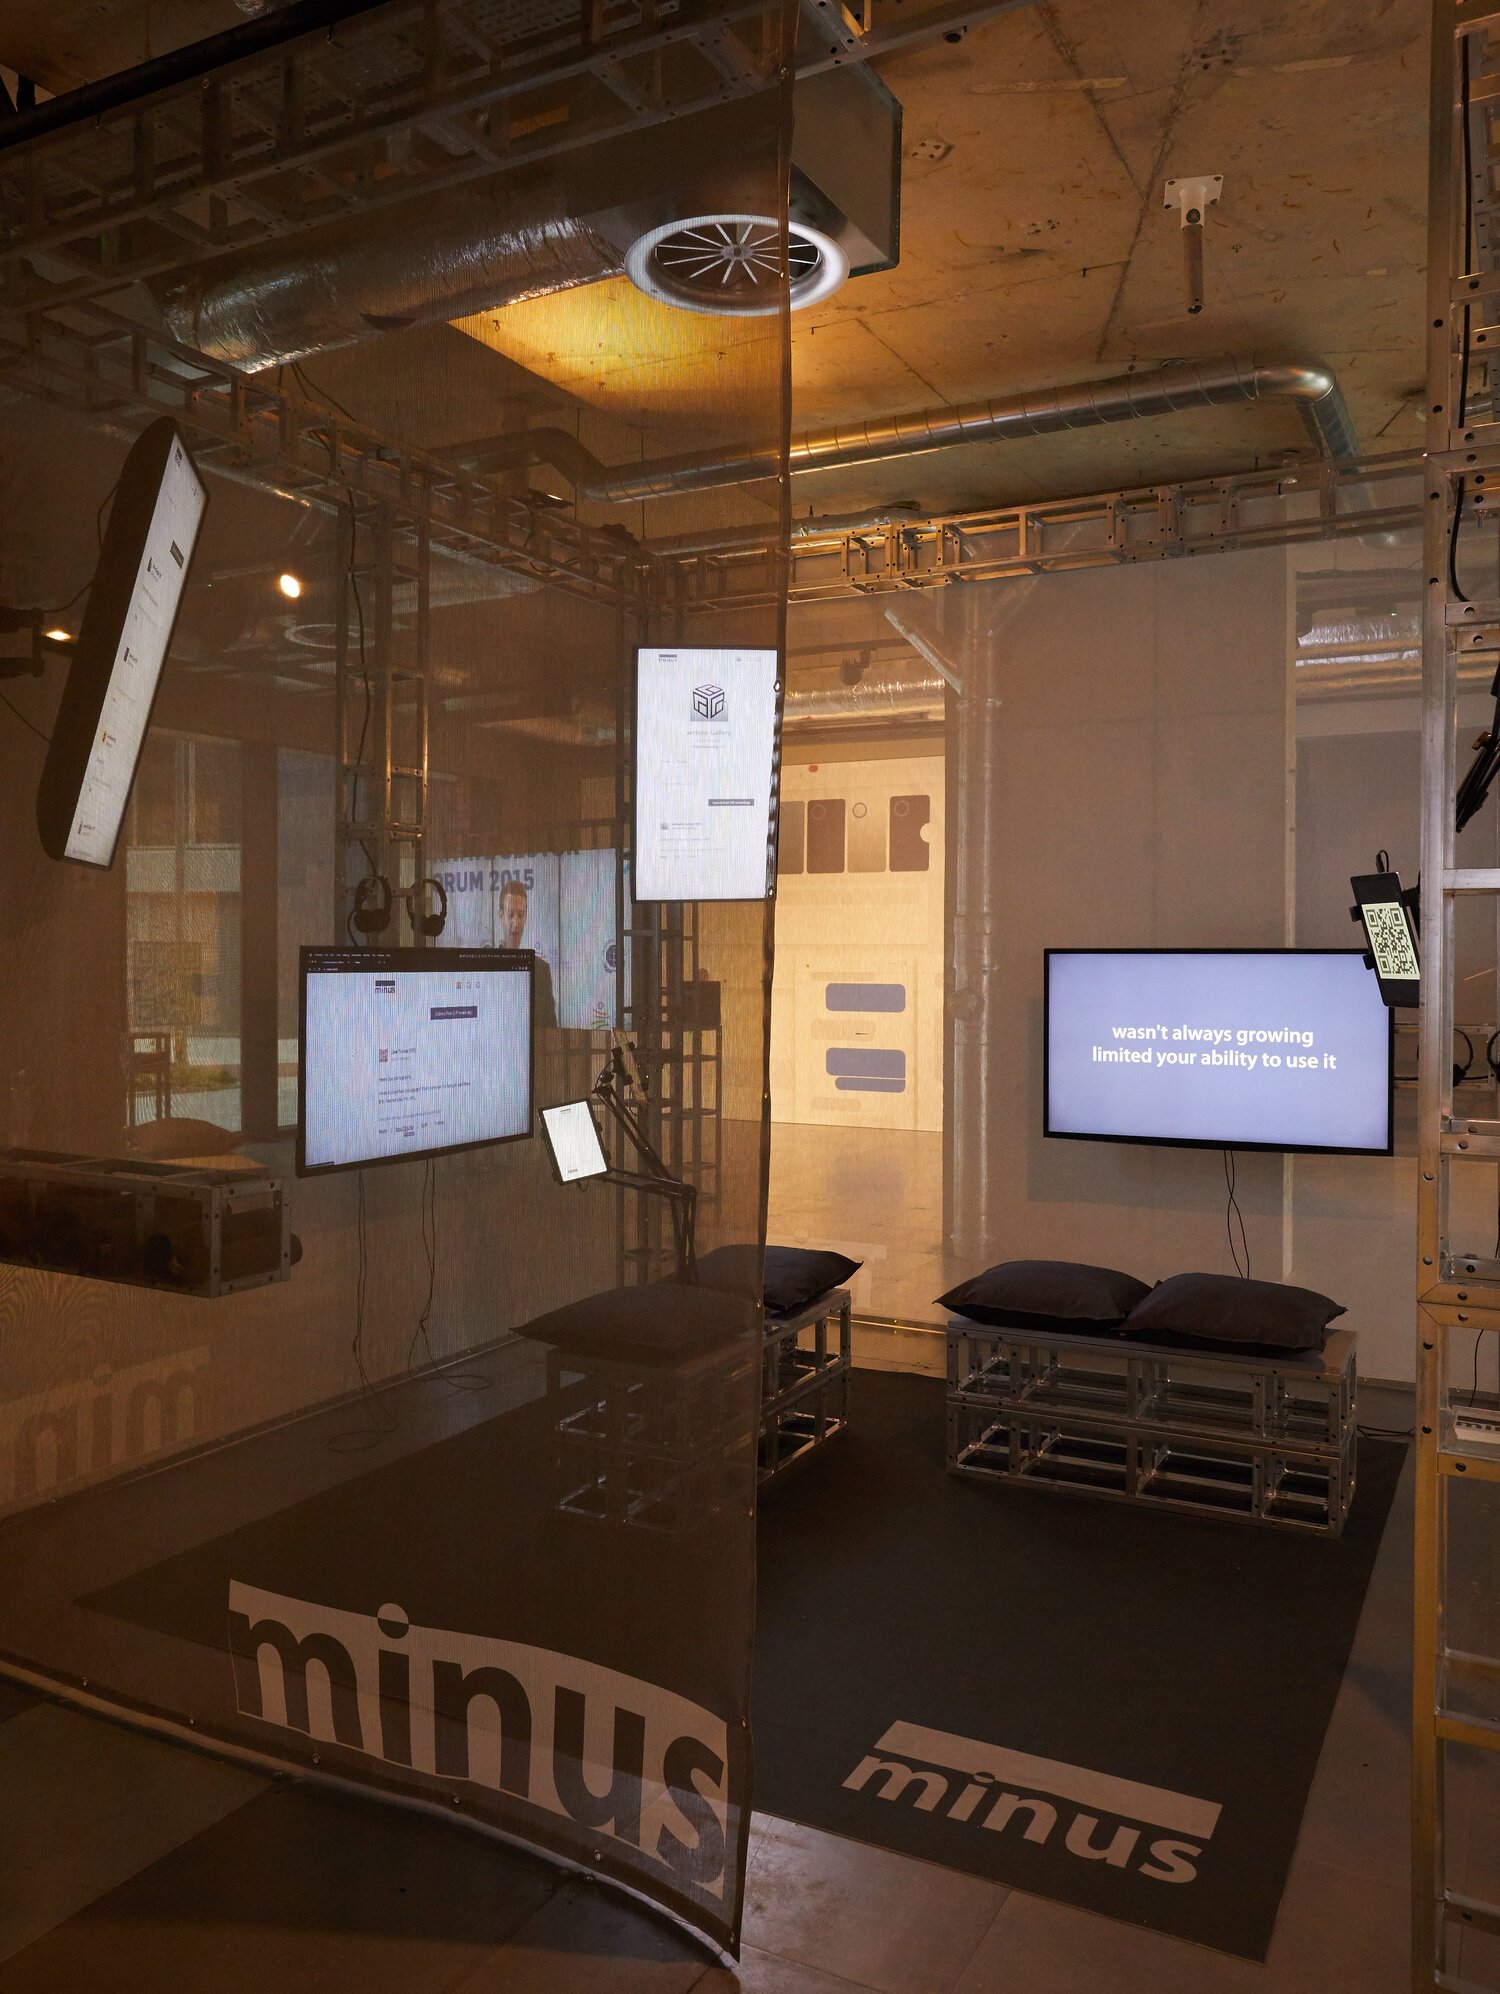 Ben Grosser, software for less, 2021. Installation view, arebyte Gallery, London. Image: Max Colson.